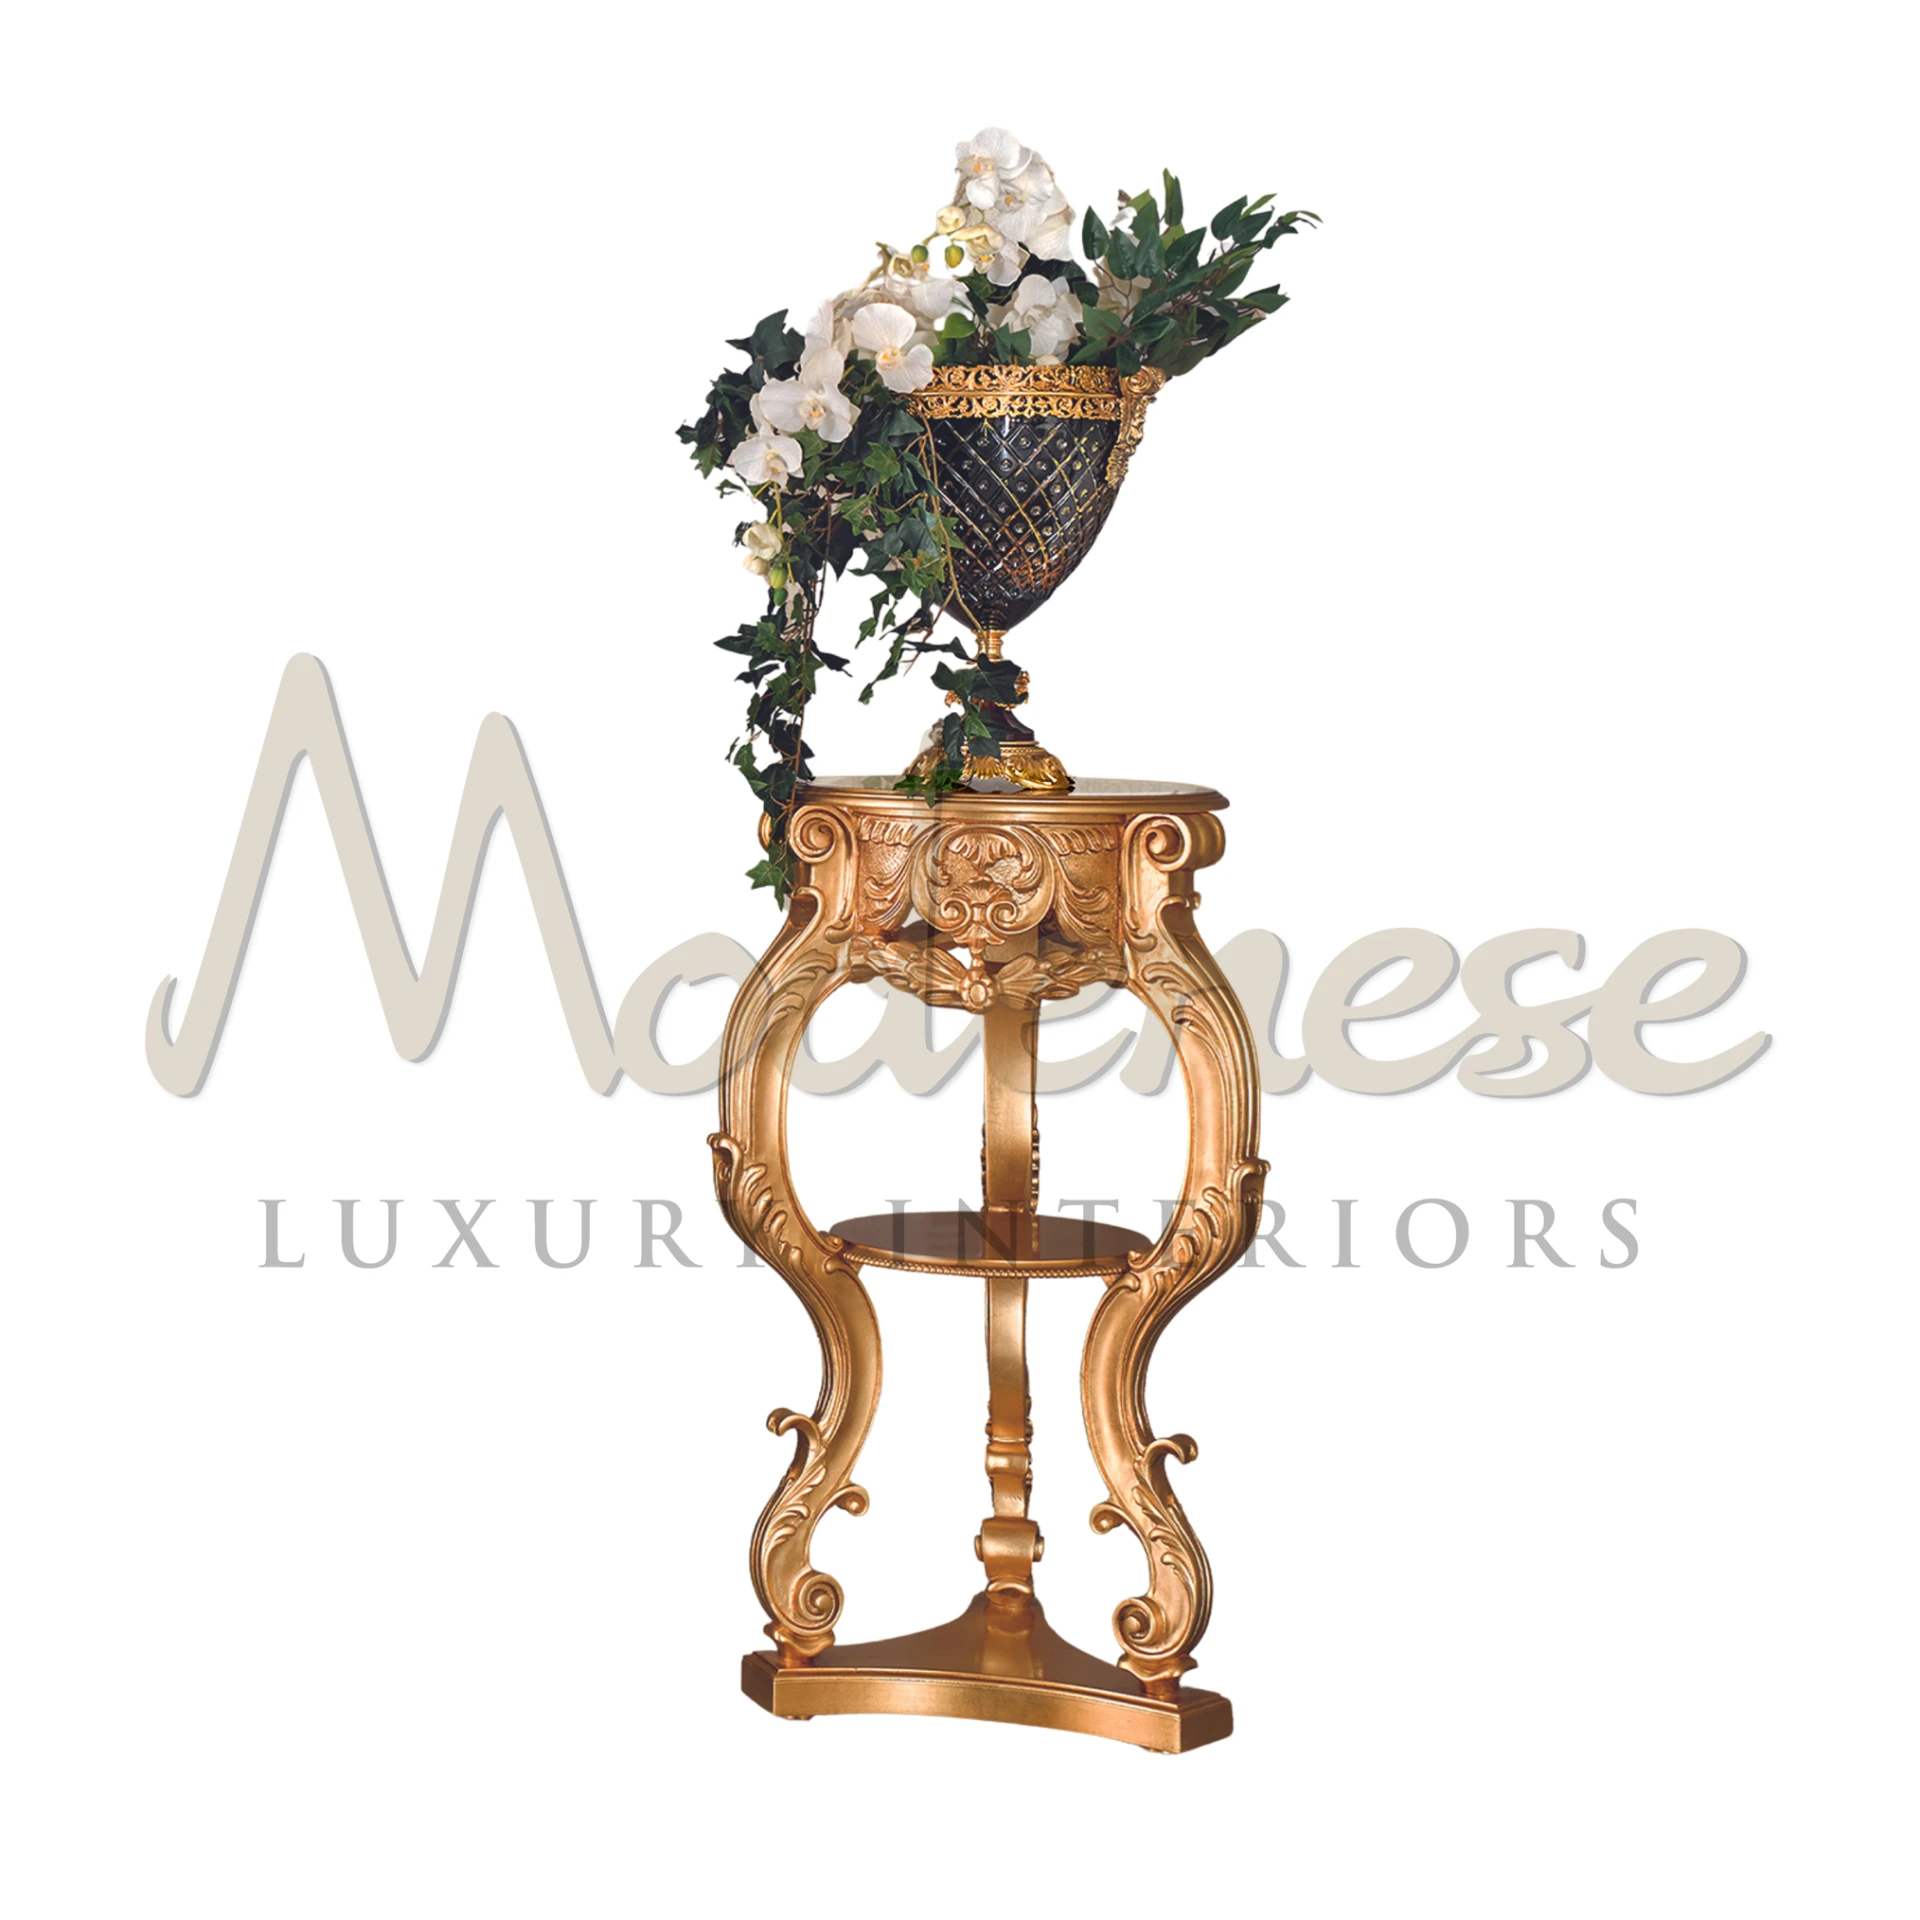 Classic Touch Decor Gold Leaf Vase Stand, a Modenese masterpiece of luxury interior and elegant design.